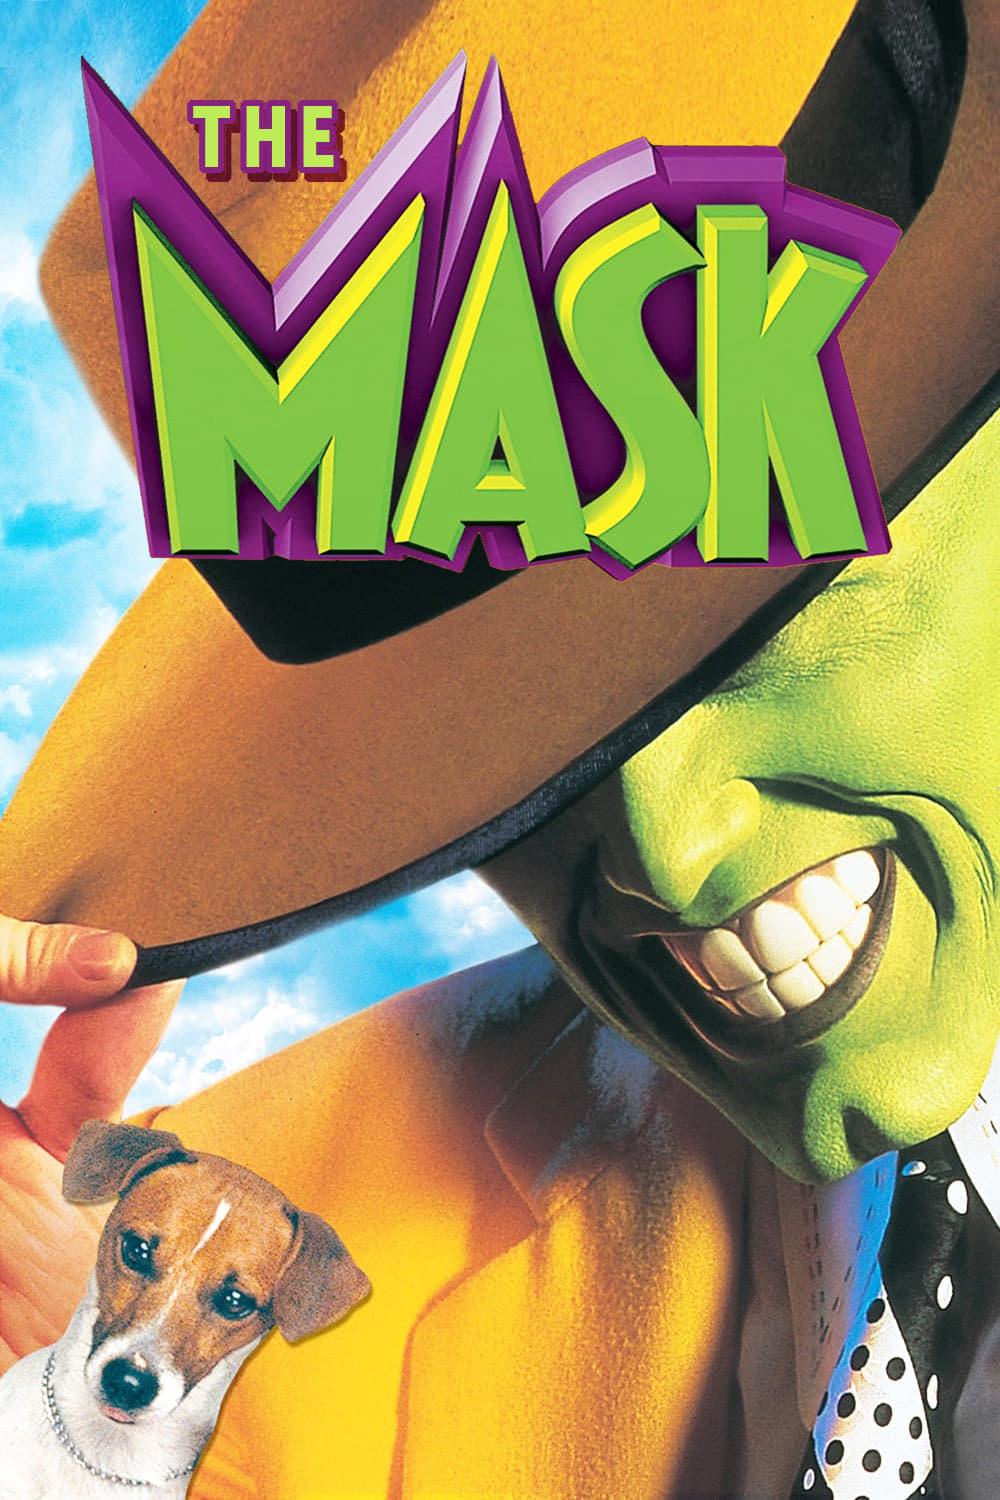 The Mask poster